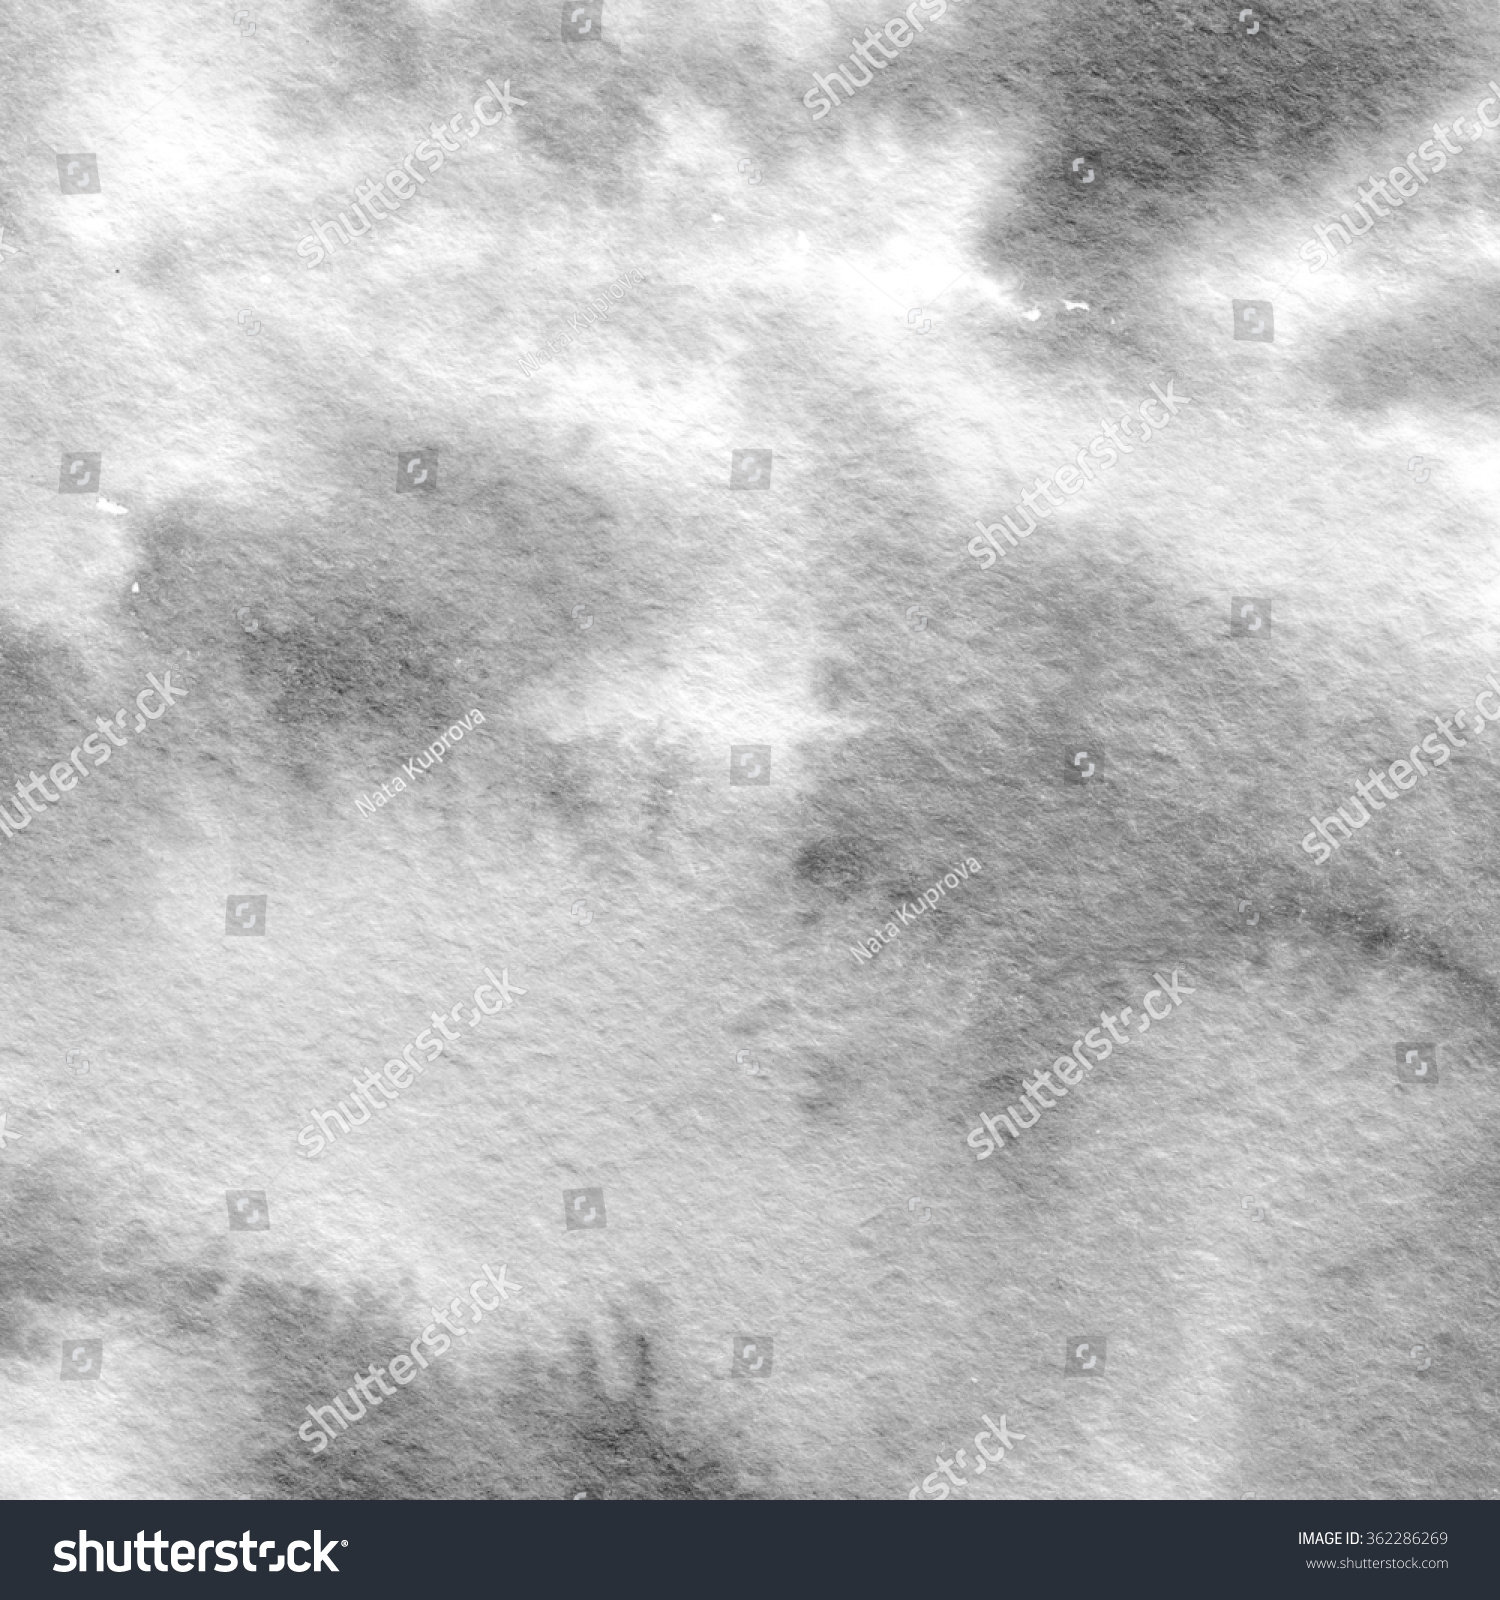 Hand Drawn Grey Watercolor Abstract Texture Stock Illustration ...